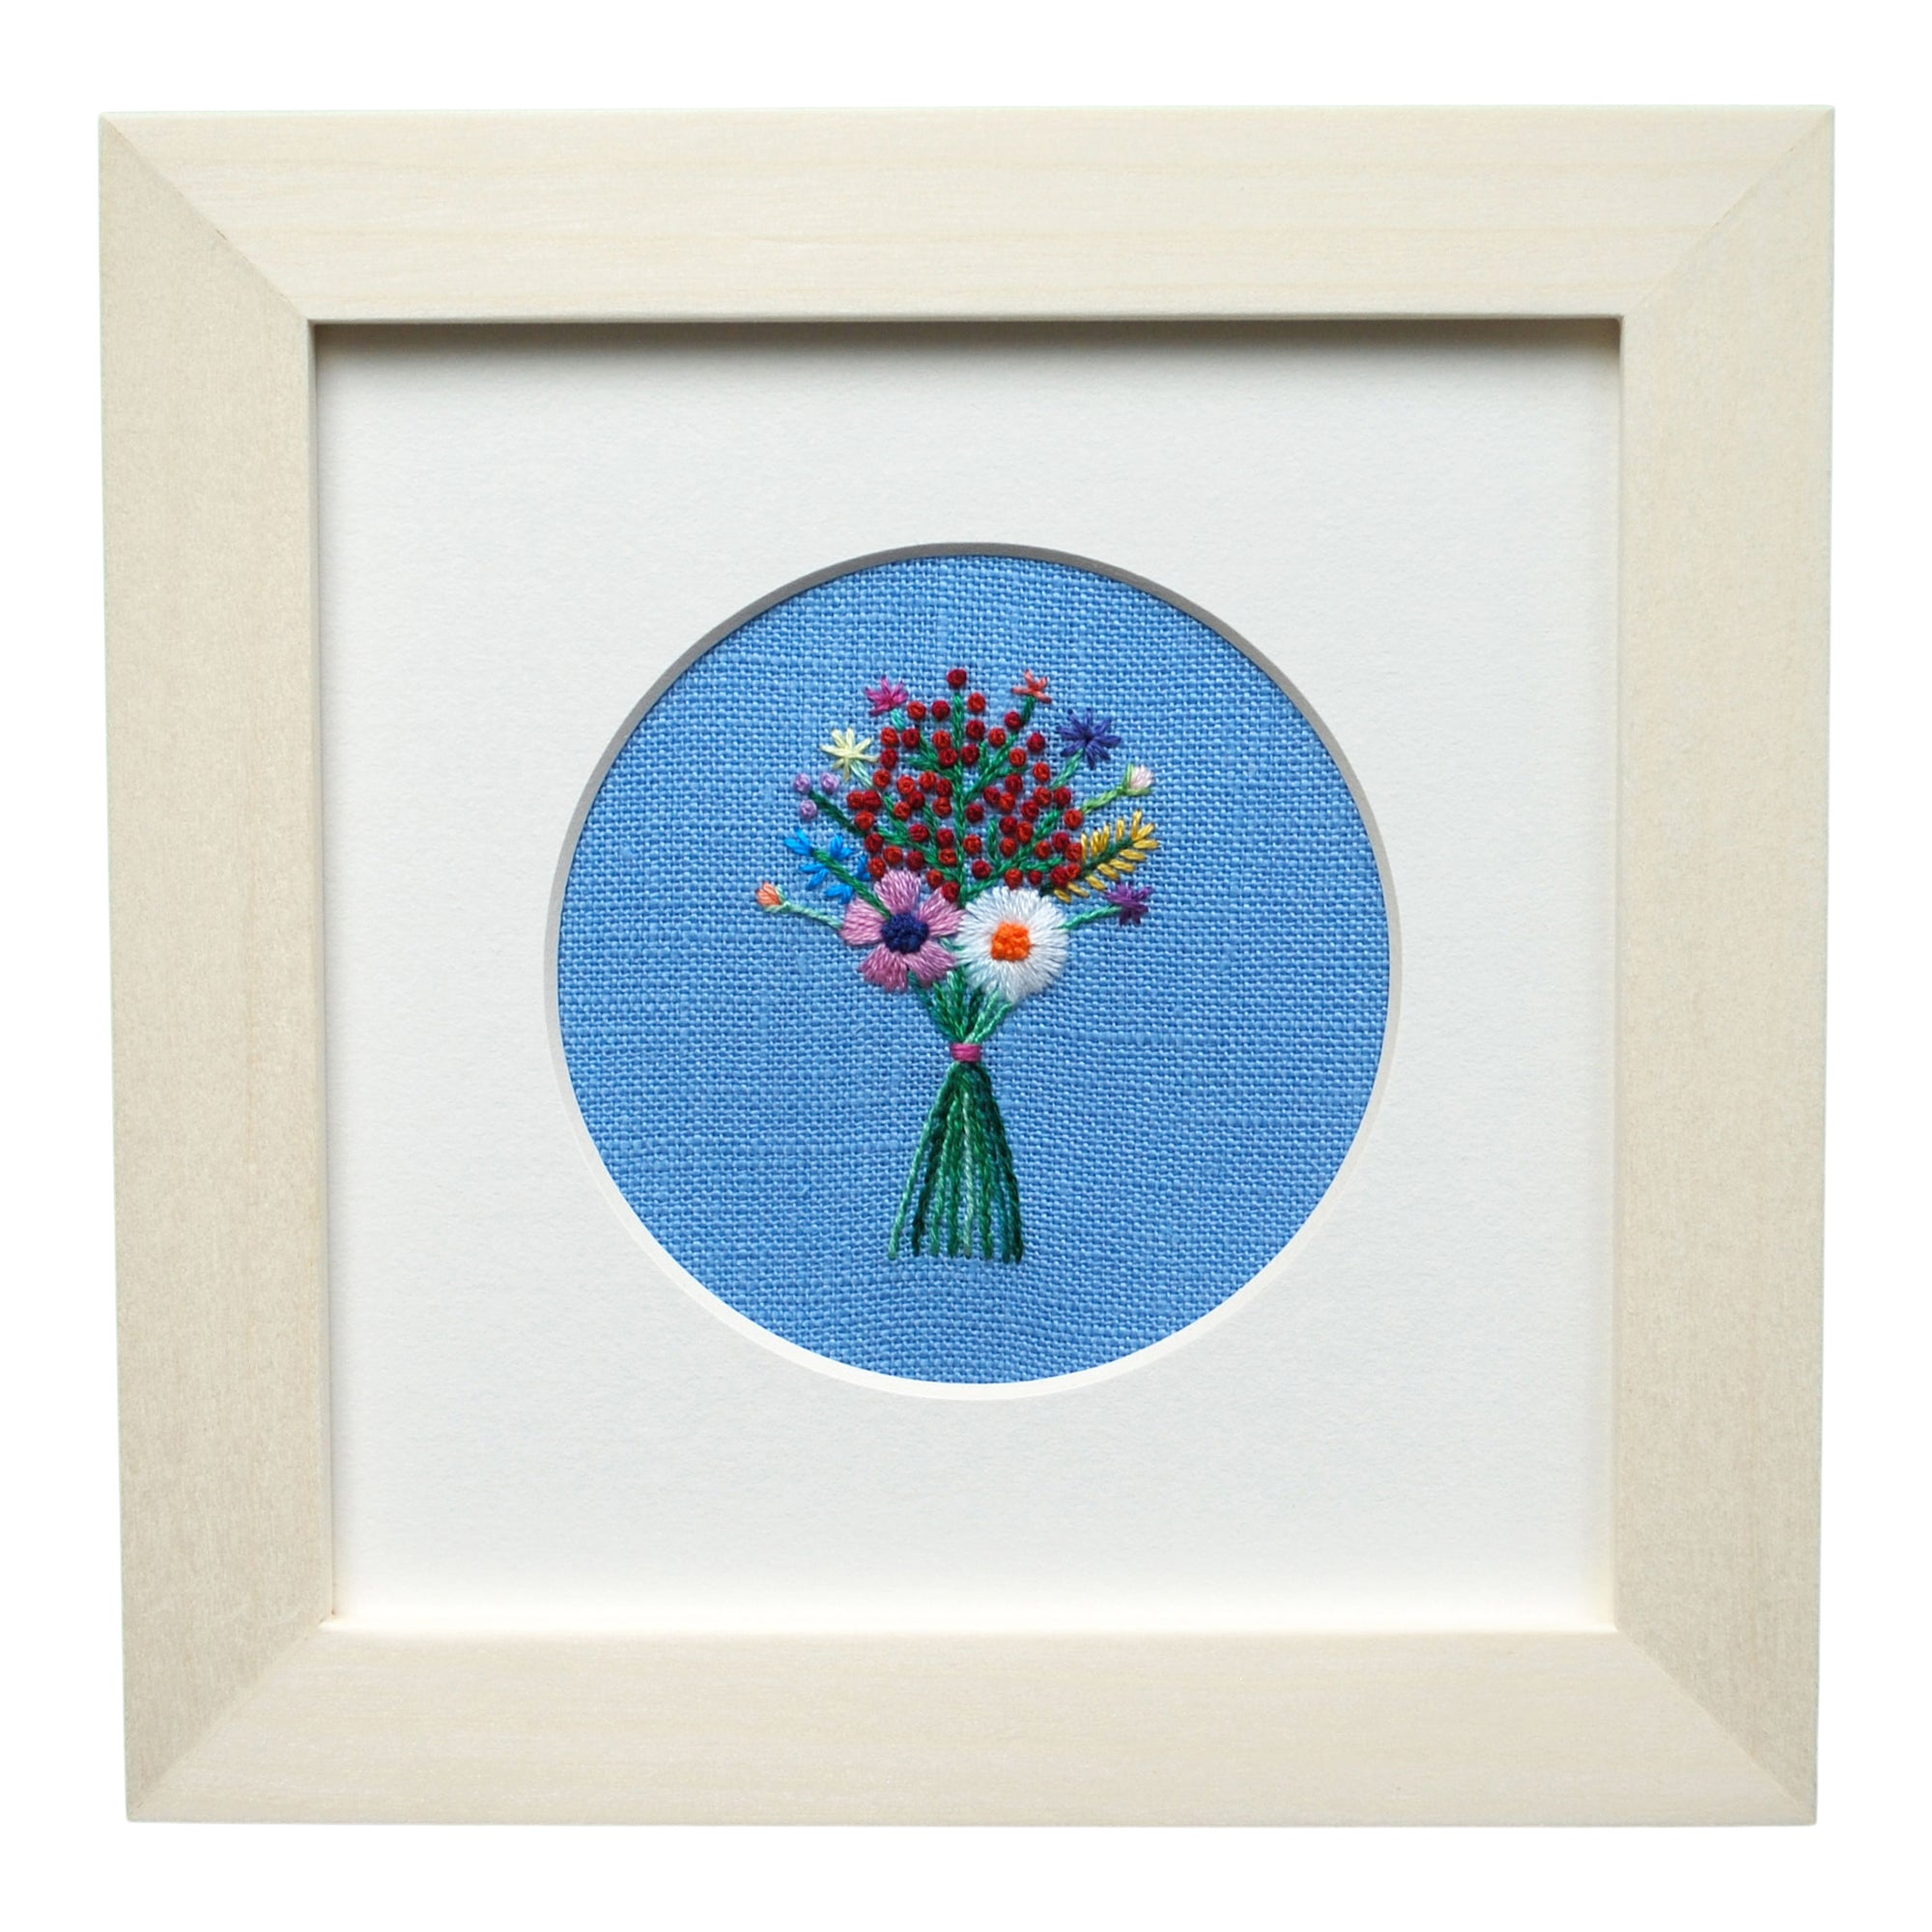 Rainbow Bouquet with Red Buds on Blue Linen Hand Embroidered Art